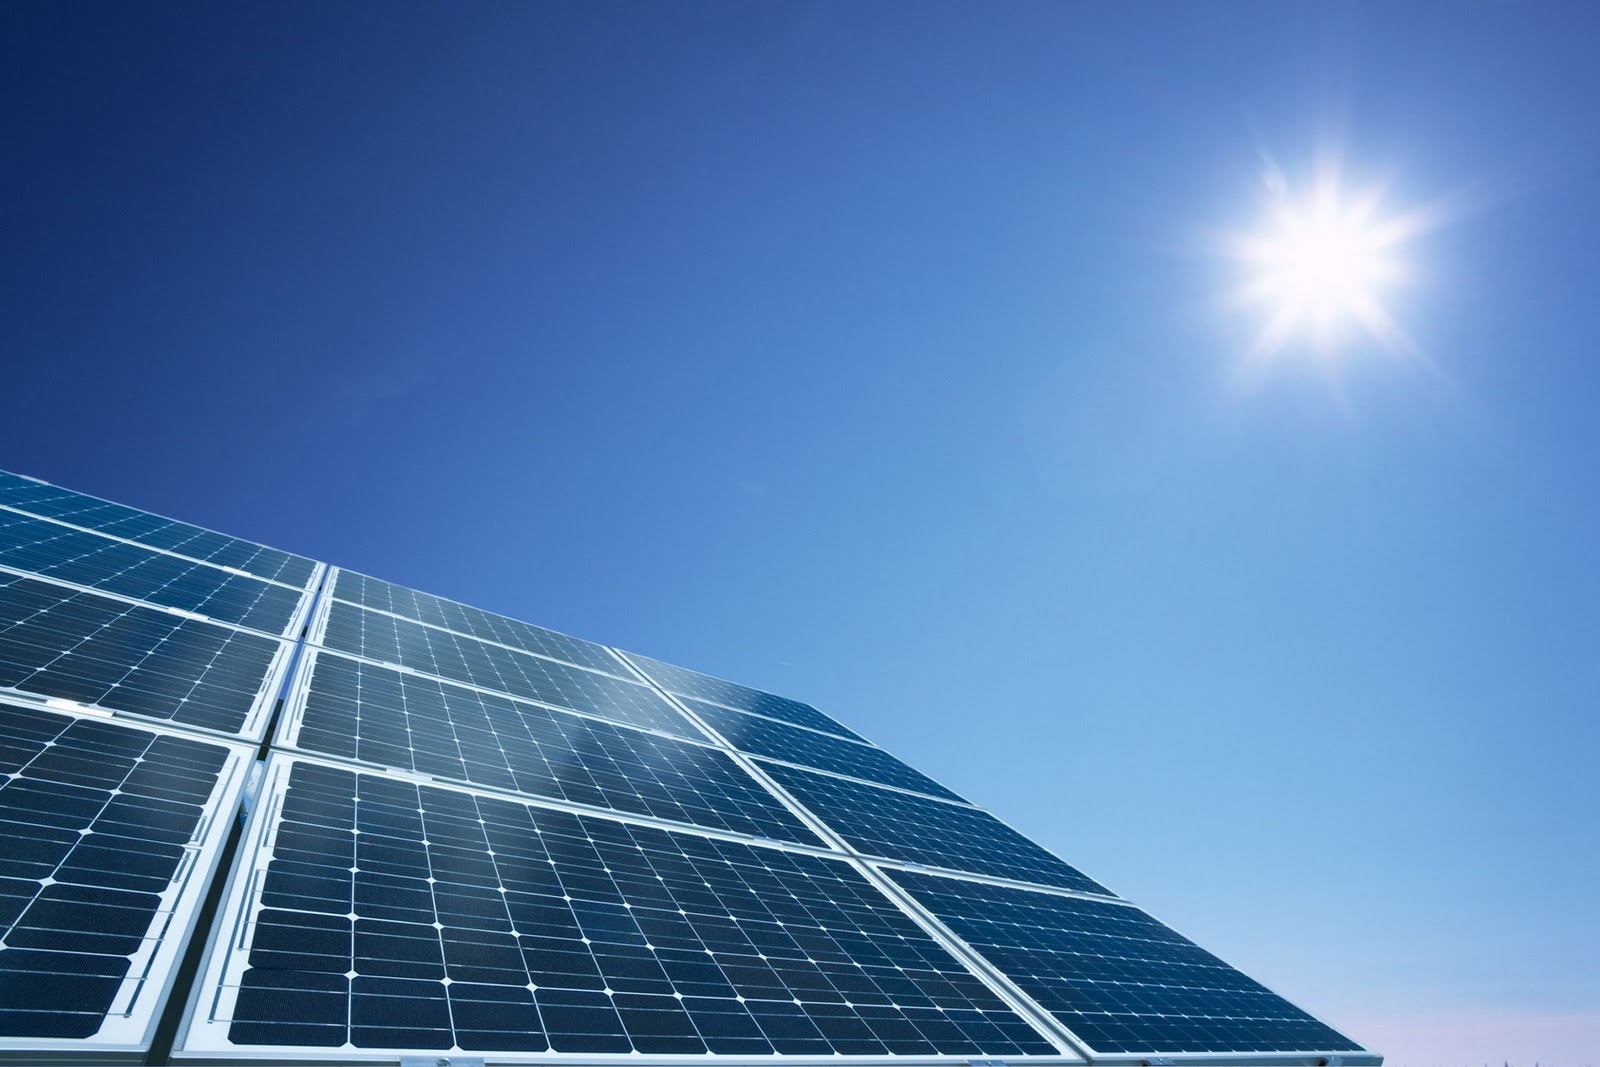 Is Solar the Future Queen of Sustainably-Reliant Energy?